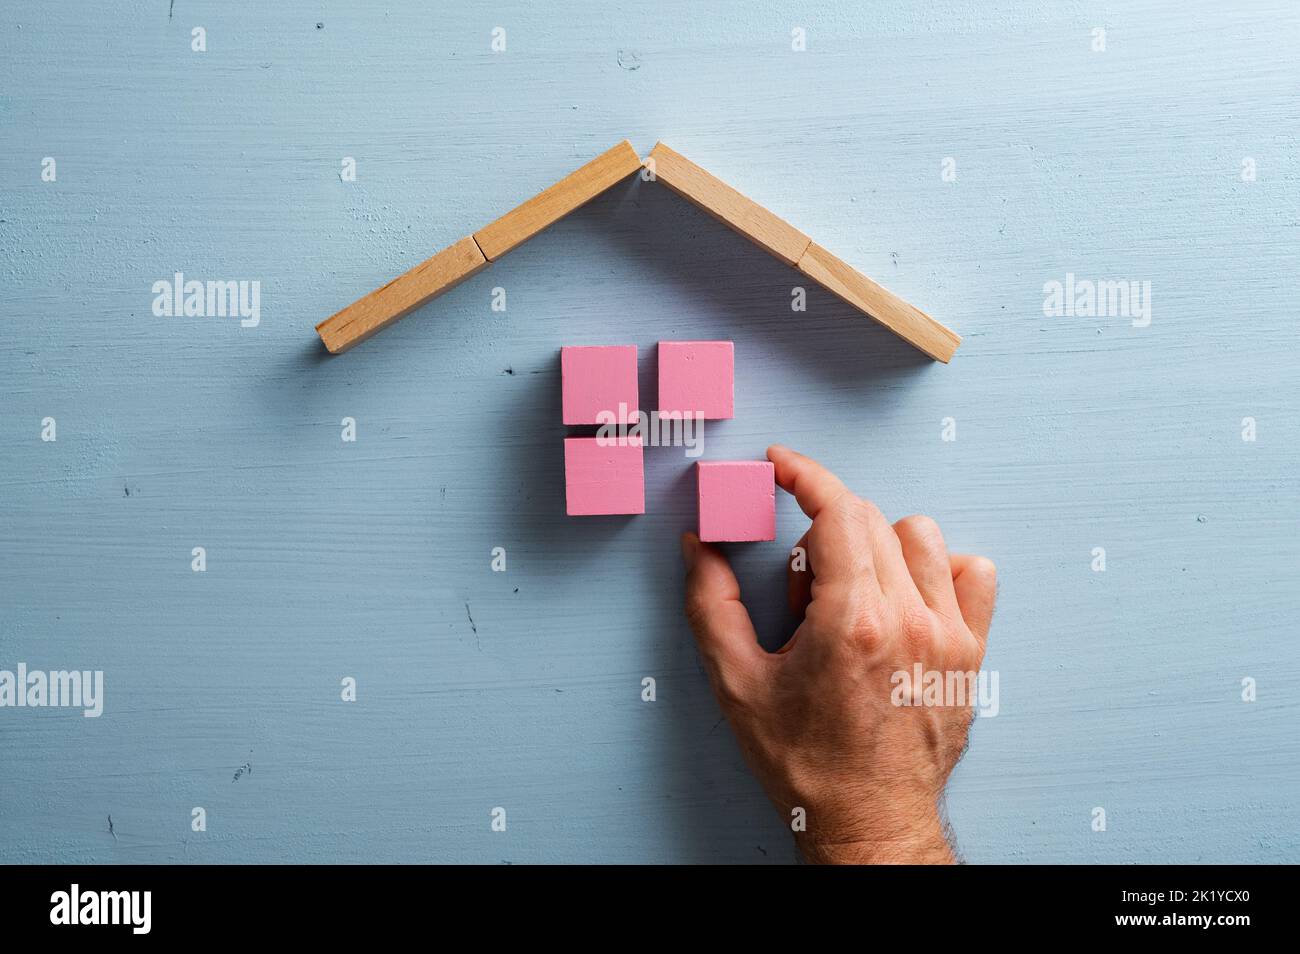 Male hand building a house of pink wooden blocks over blue wooden background. Stock Photo